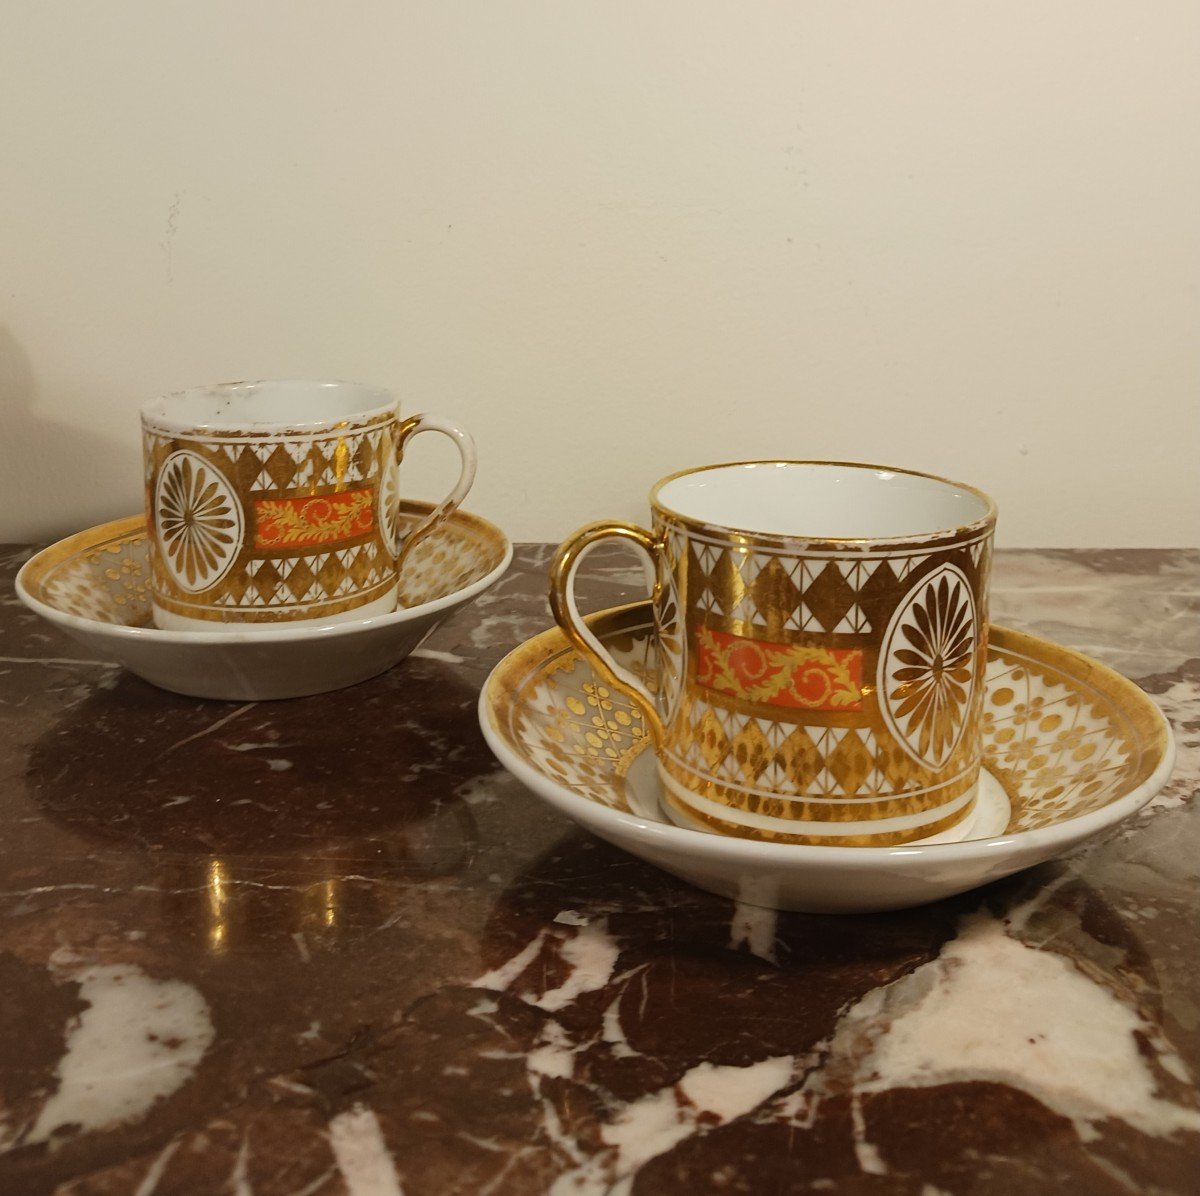 Paris, Revolution Or Empire Period - Pair Of Litron Cups And Saucers - Rich Gilded Decoration And Nankin Background-photo-3